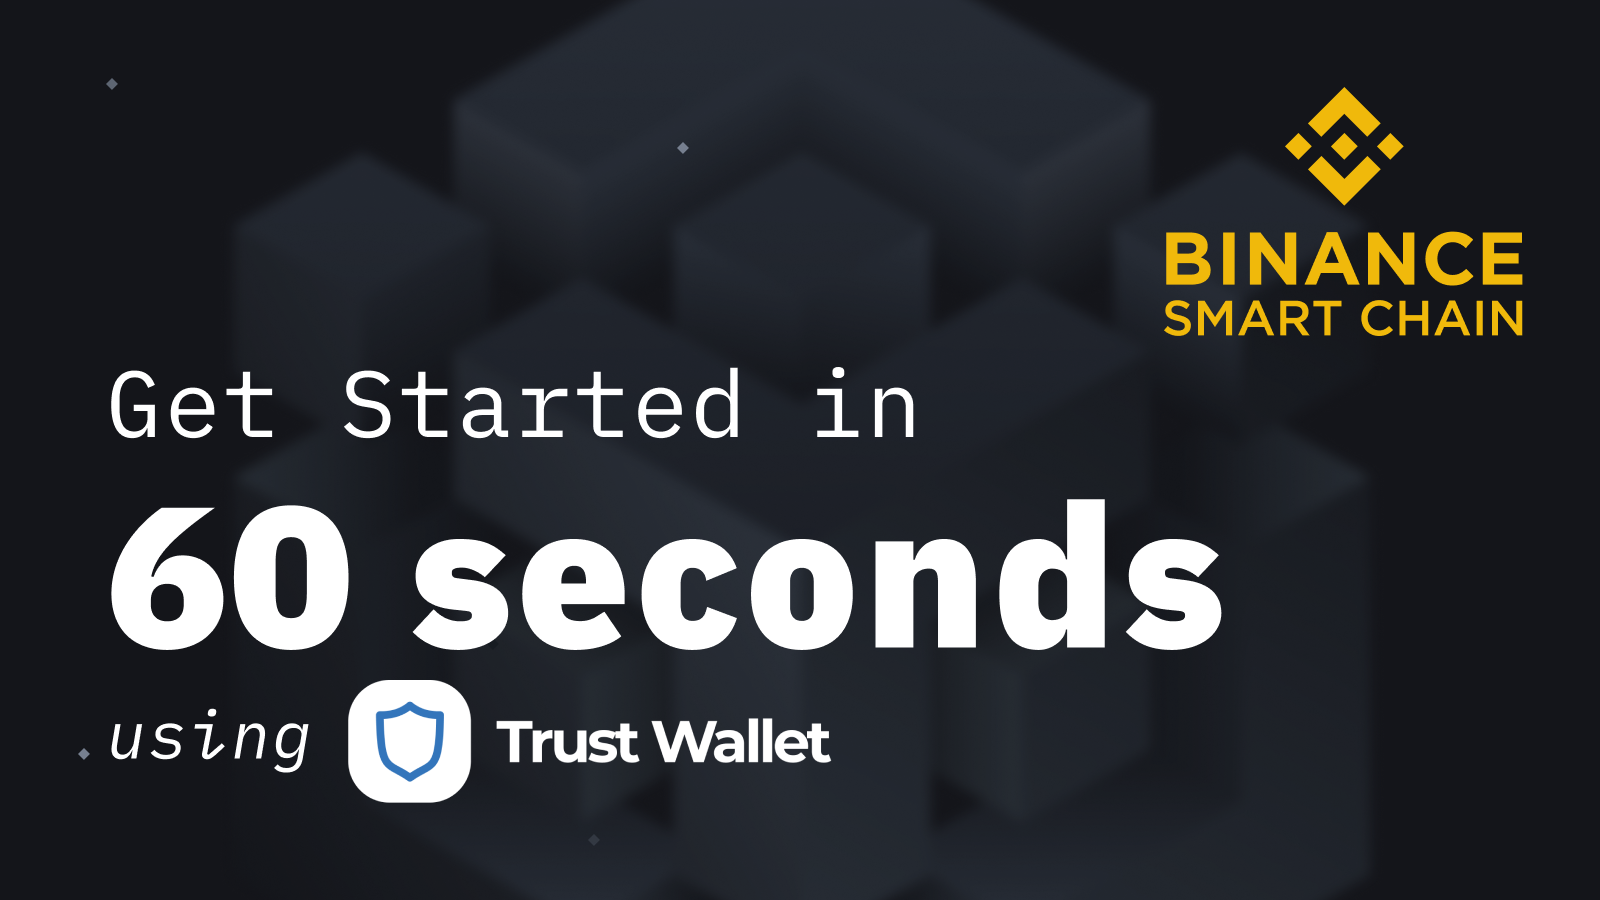 How to Set Up and Use Trust Wallet for Binance Smart Chain